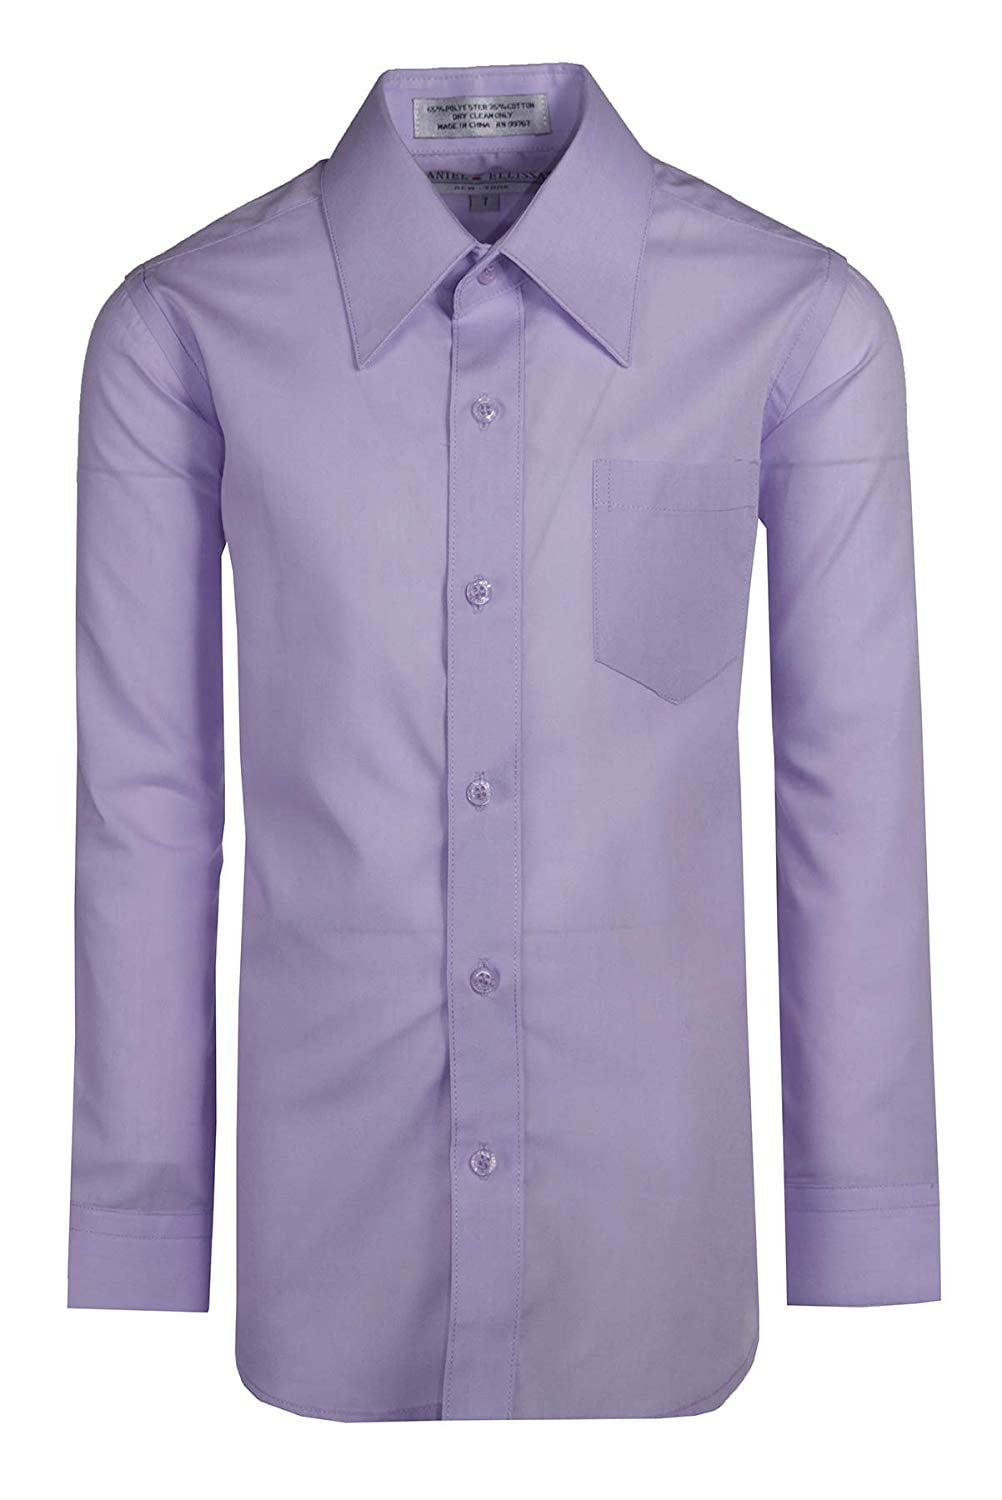 Tuxgear Boys Long Sleeve Button Up Formal Dress Shirt in Assorted Colors